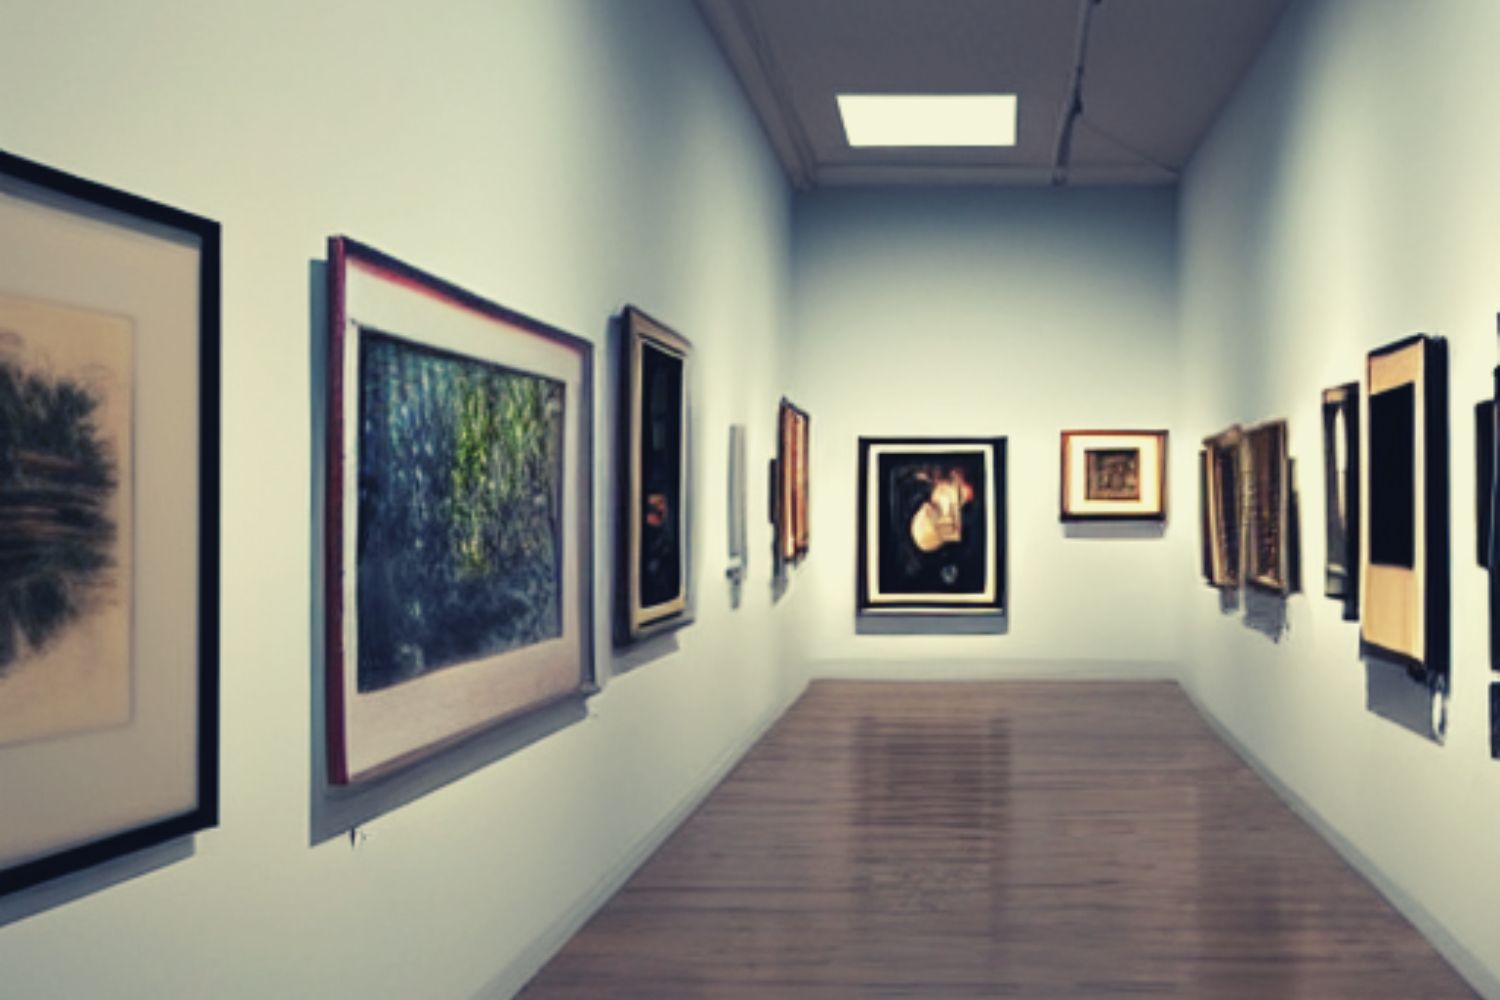 An Art Gallery with Paintings on the Walls